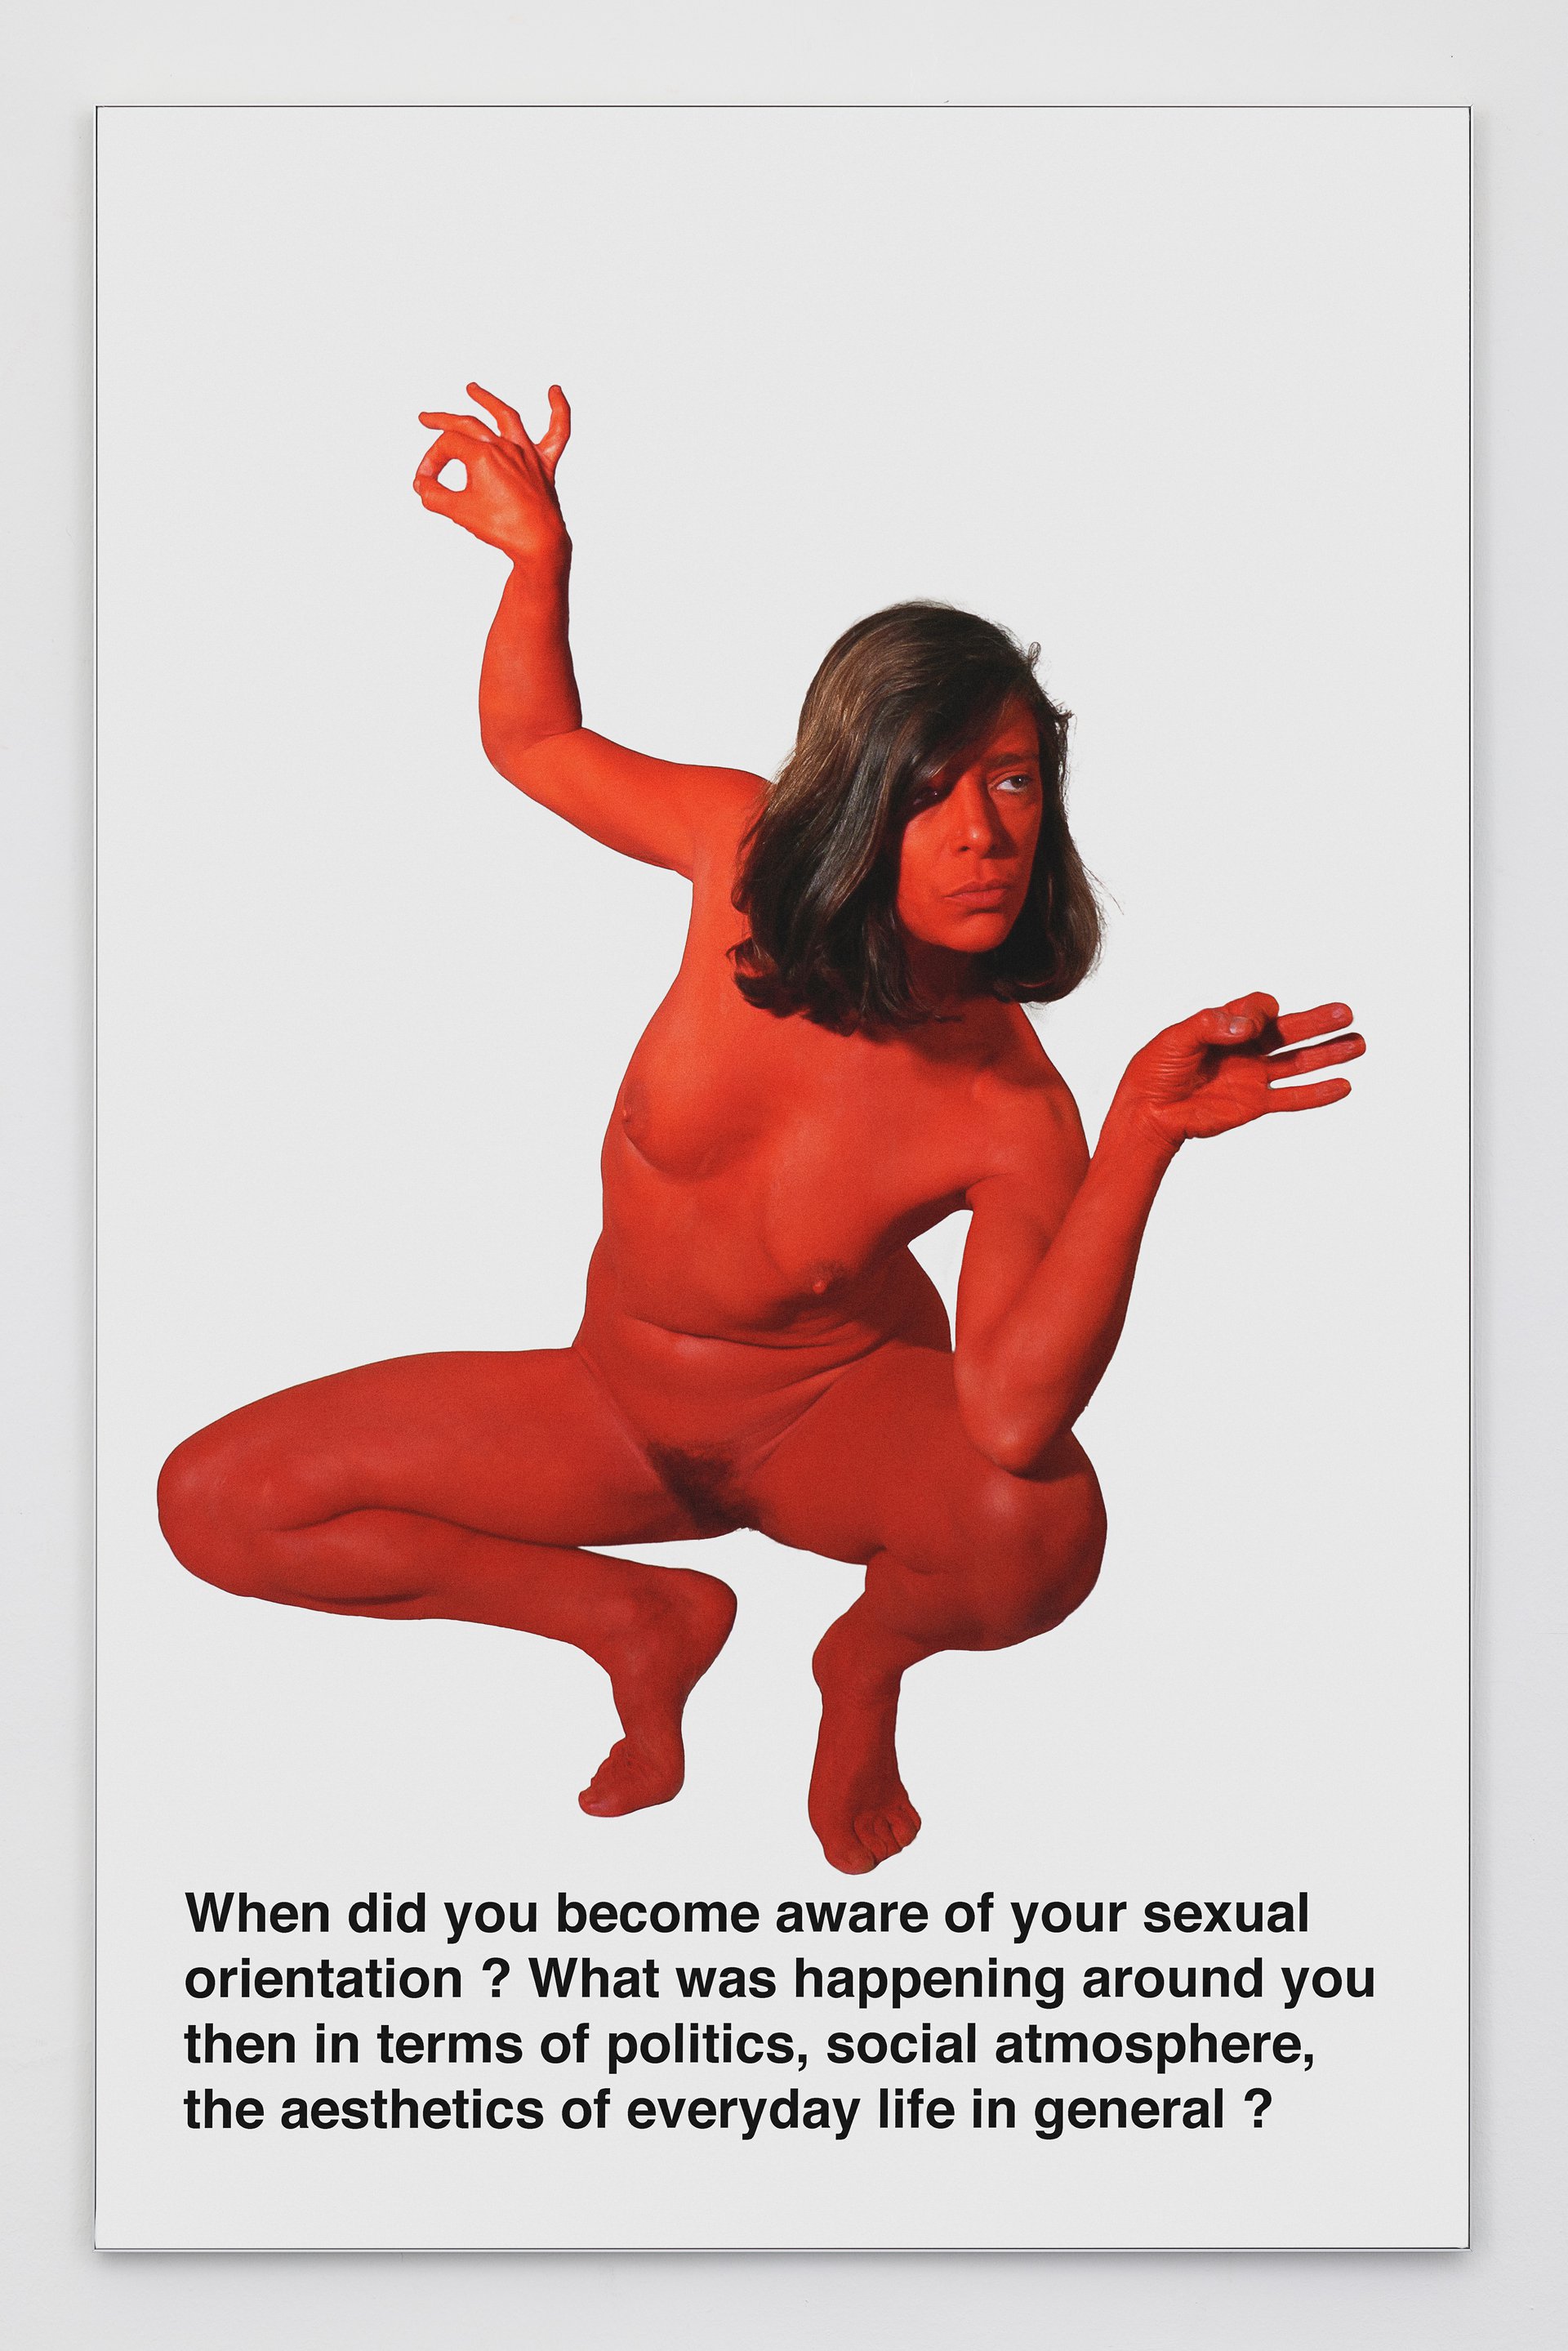 Lili Reynaud-DewarWhen did you become aware of your sexual orientation ? What was happening around you then in terms of politics, social atmosphere, the aesthetics of everyday life in general?, 2022Print on Dynajet foil mounted on aluminium frame90 x 140 cm